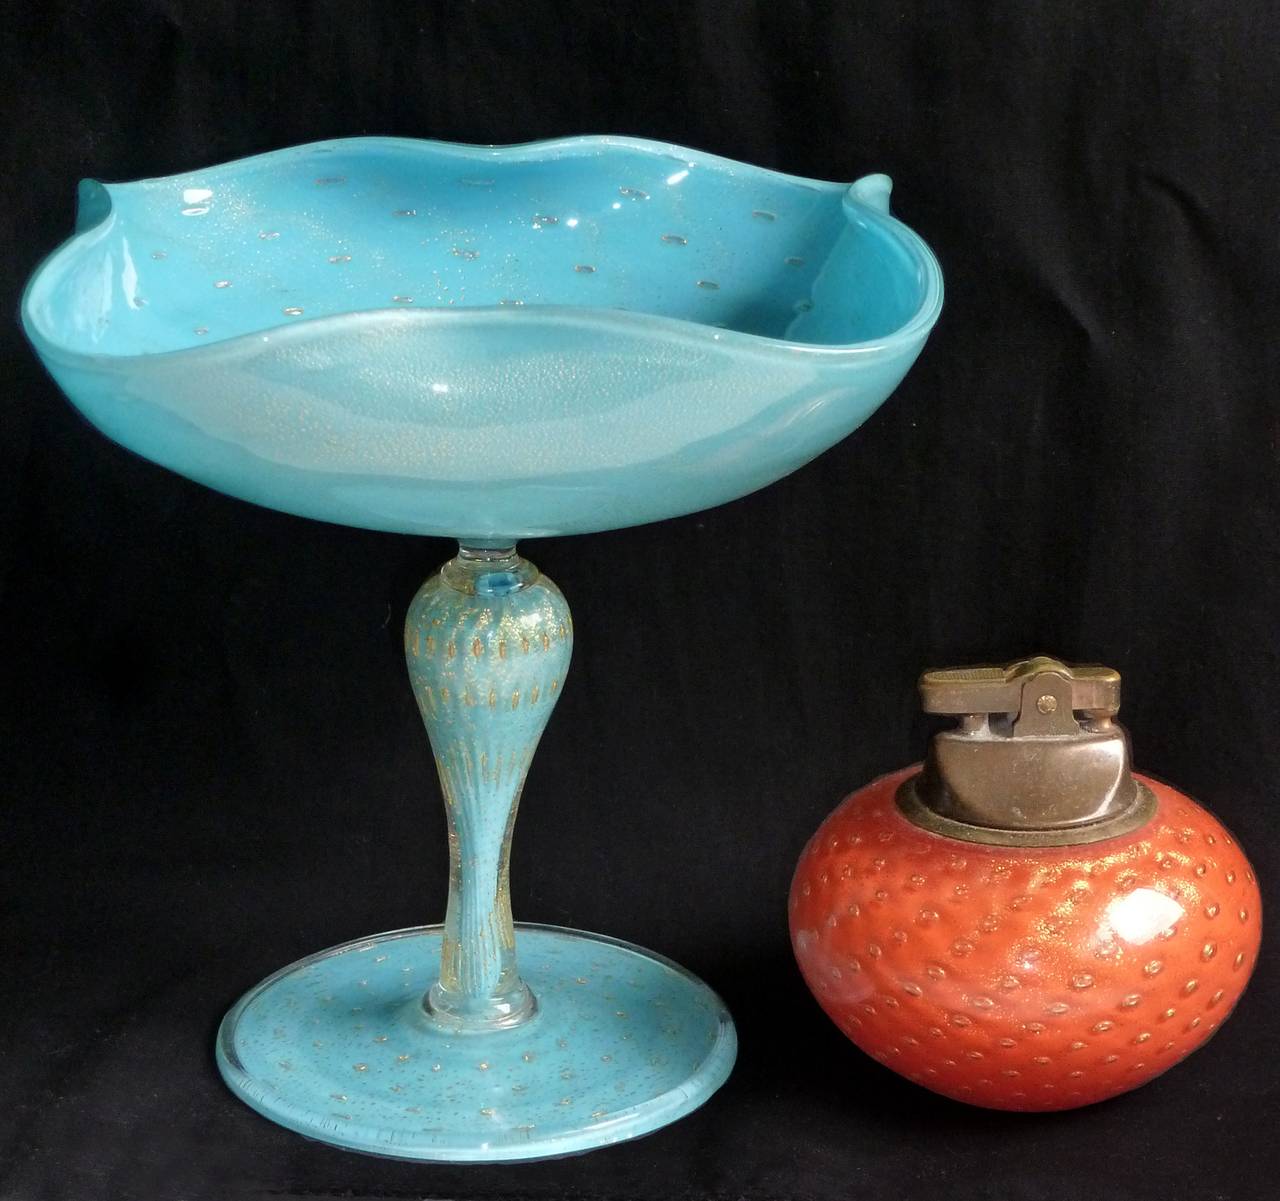 Gorgeous Murano handblown sky blue, controlled bubbles and gold flecks Italian art glass pedestal compote bowl. Documented to designer Alfredo Barbini, circa 1950s. Profusely covered in gold leaf inside and out and with a squared top. This is one of